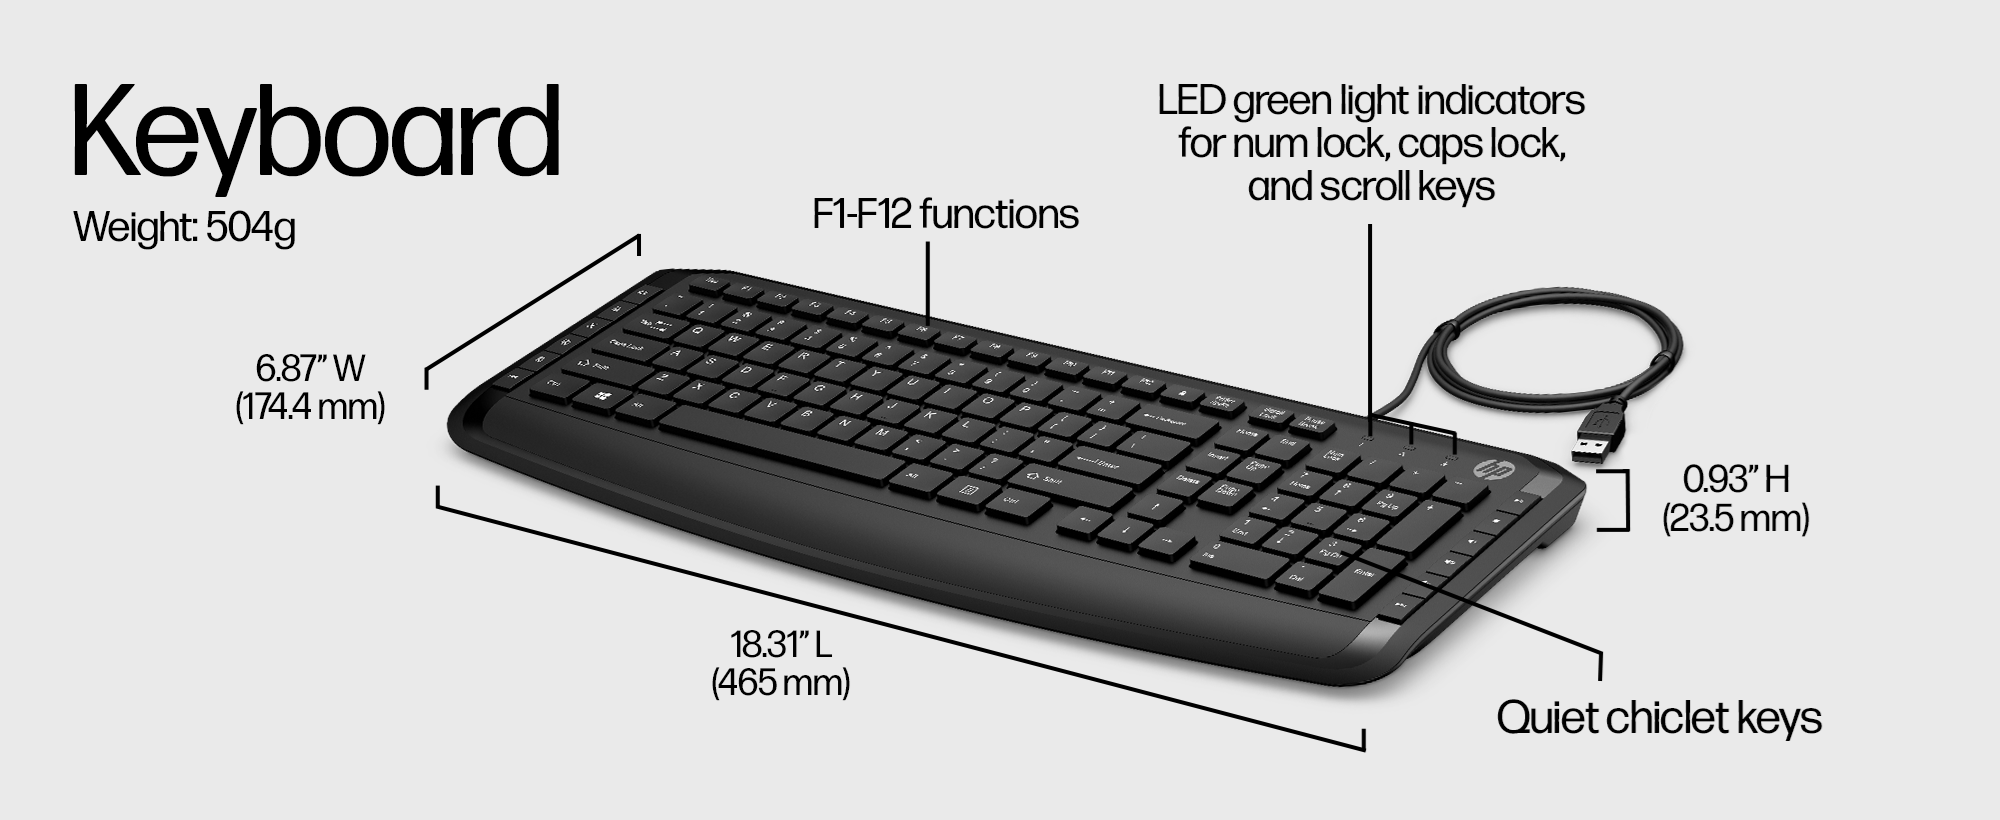 HP Pavilion 200 - keyboard - - 9DF28AA#ABL and set mouse black